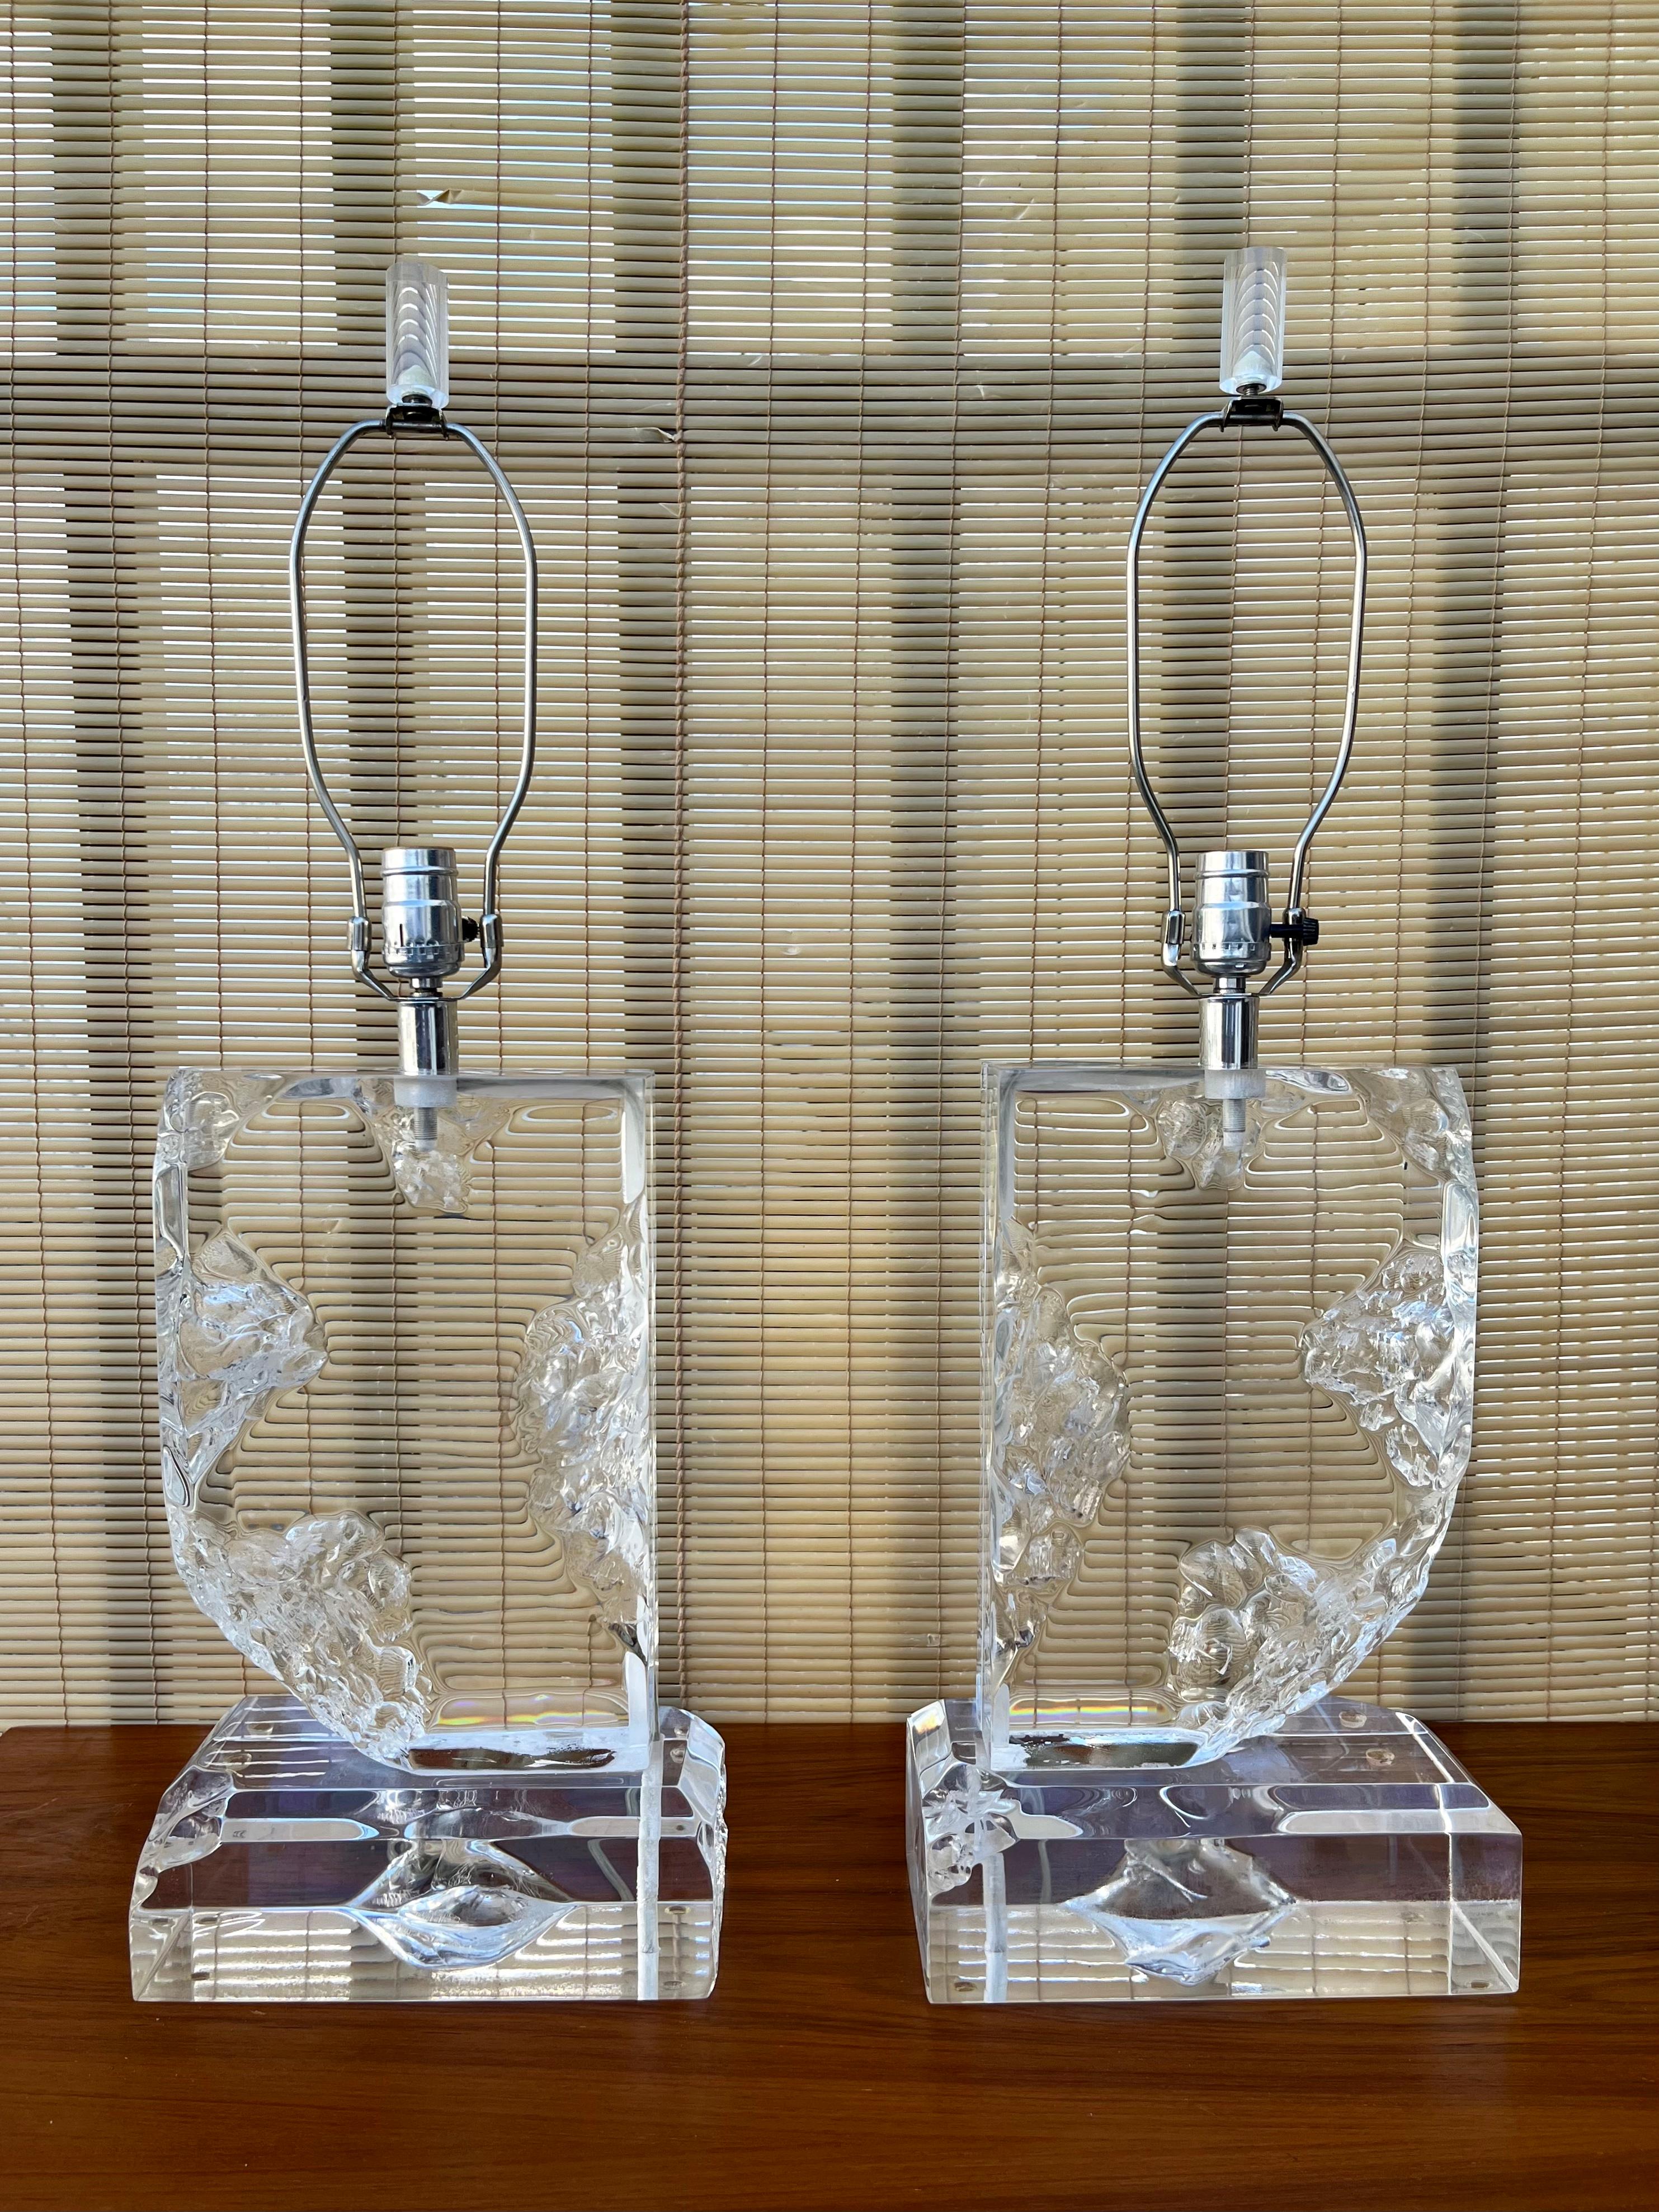 A Pair of Vintage Hollywood Regency Lucite Block Table Lamps. Circa 1970s.s. 
Feature thick sculpted acrylic bases with raw cutout edges resembling ice blocks. With Chromed Hardware and the original lucite finials. 
In Excellent original condition